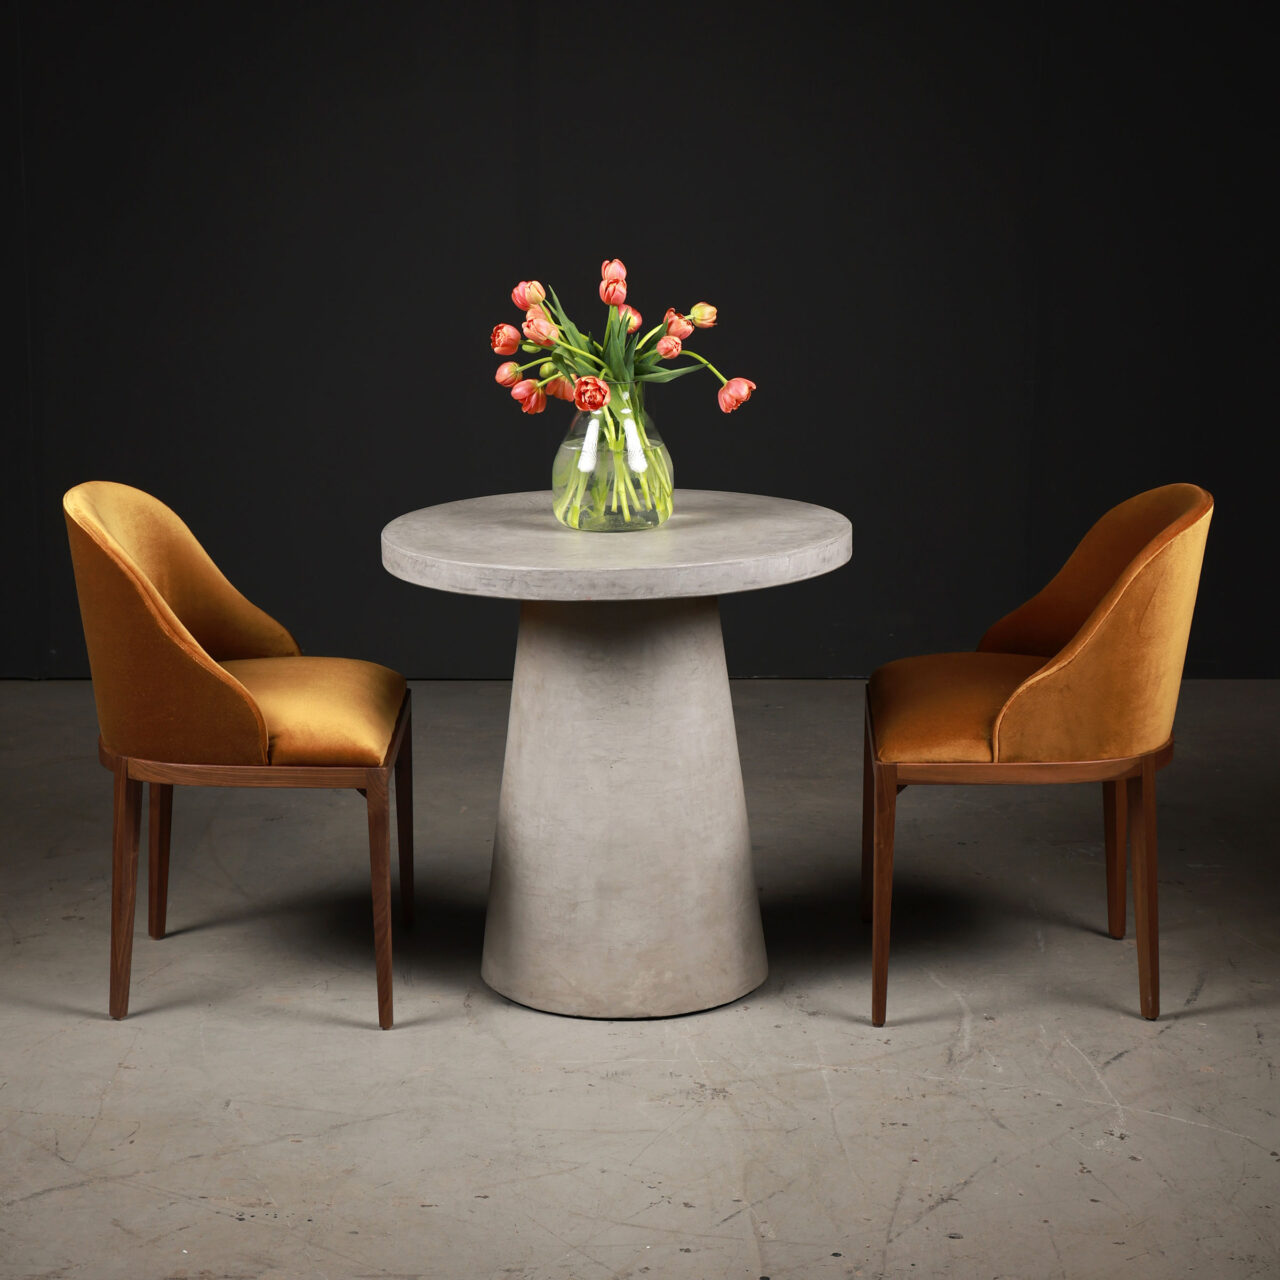 A contemporary dining setup by SENTIENT Furniture with a round concrete table and two mustard velvet chairs, complemented by a bouquet of red tulips on a dark studio background, showing the portfolio of restaurant tables by SENTIENT.